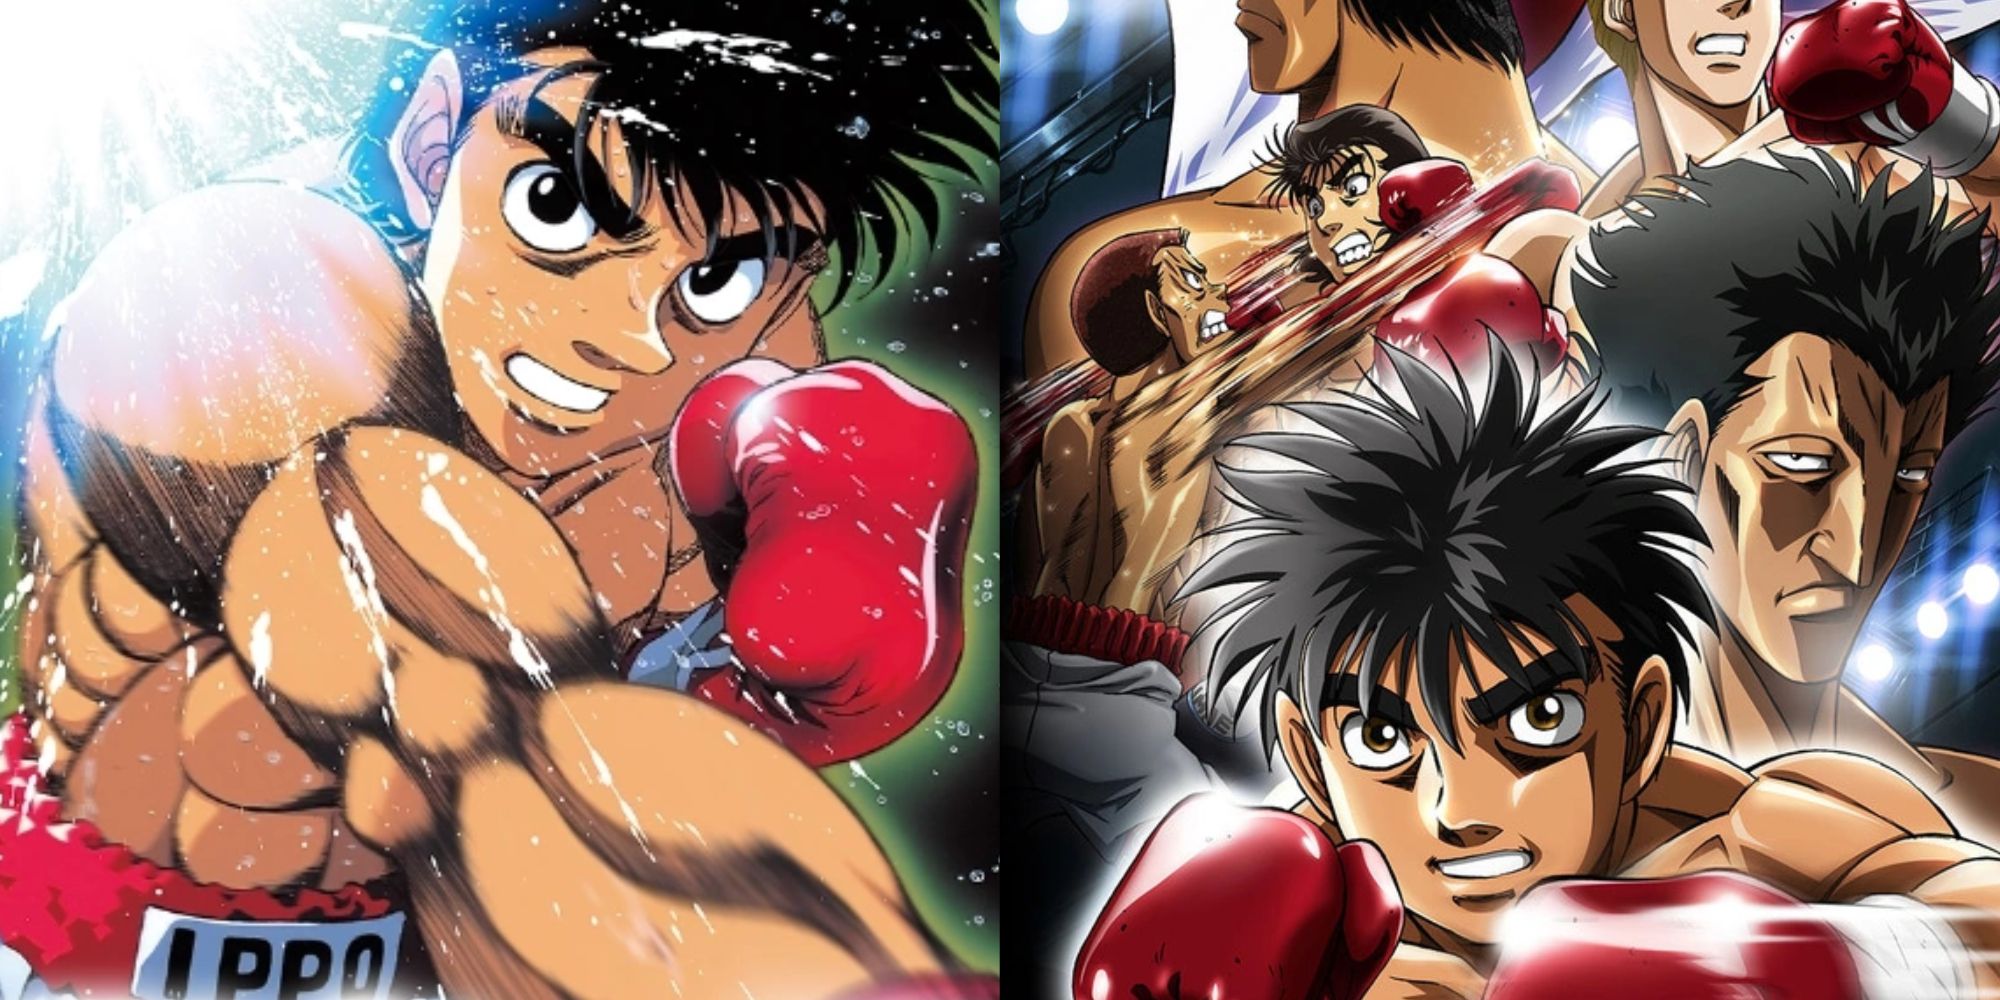 Main images of the anime Hajime no Ippo with Ippo and other boxers